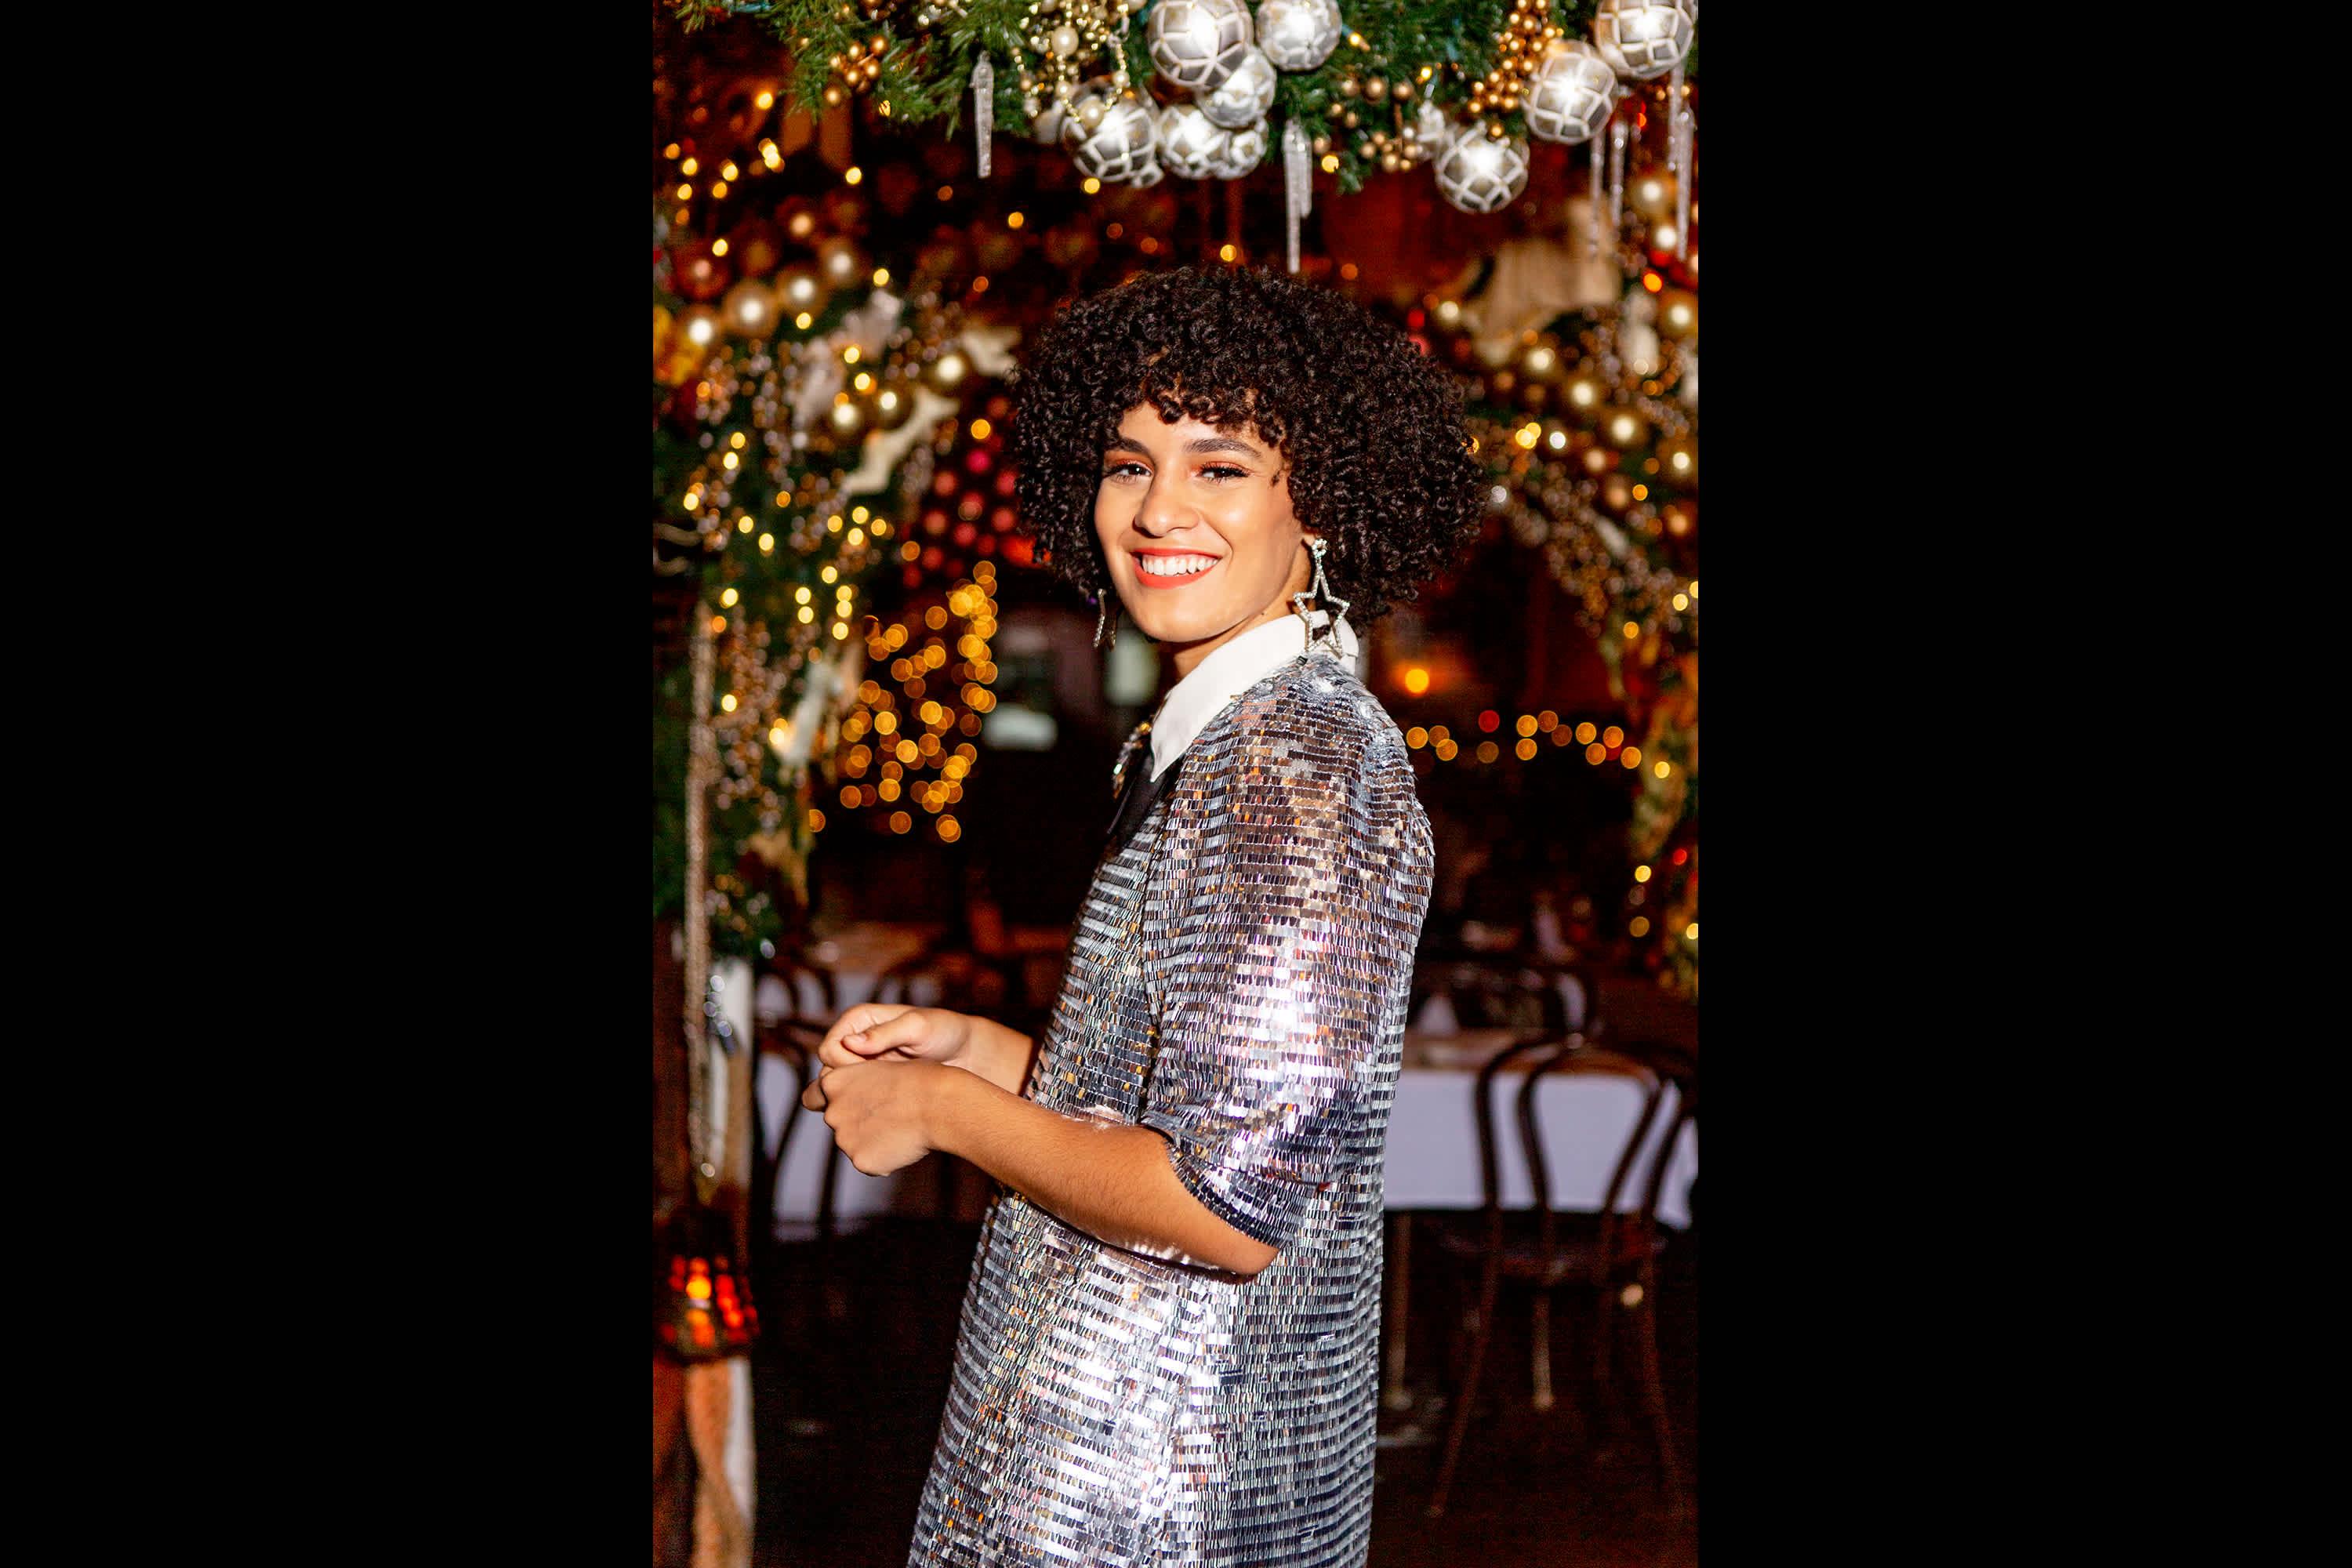 A person poses for the camera at Rolfs Gramercy in Manhattan, with Christmas ornaments in the background